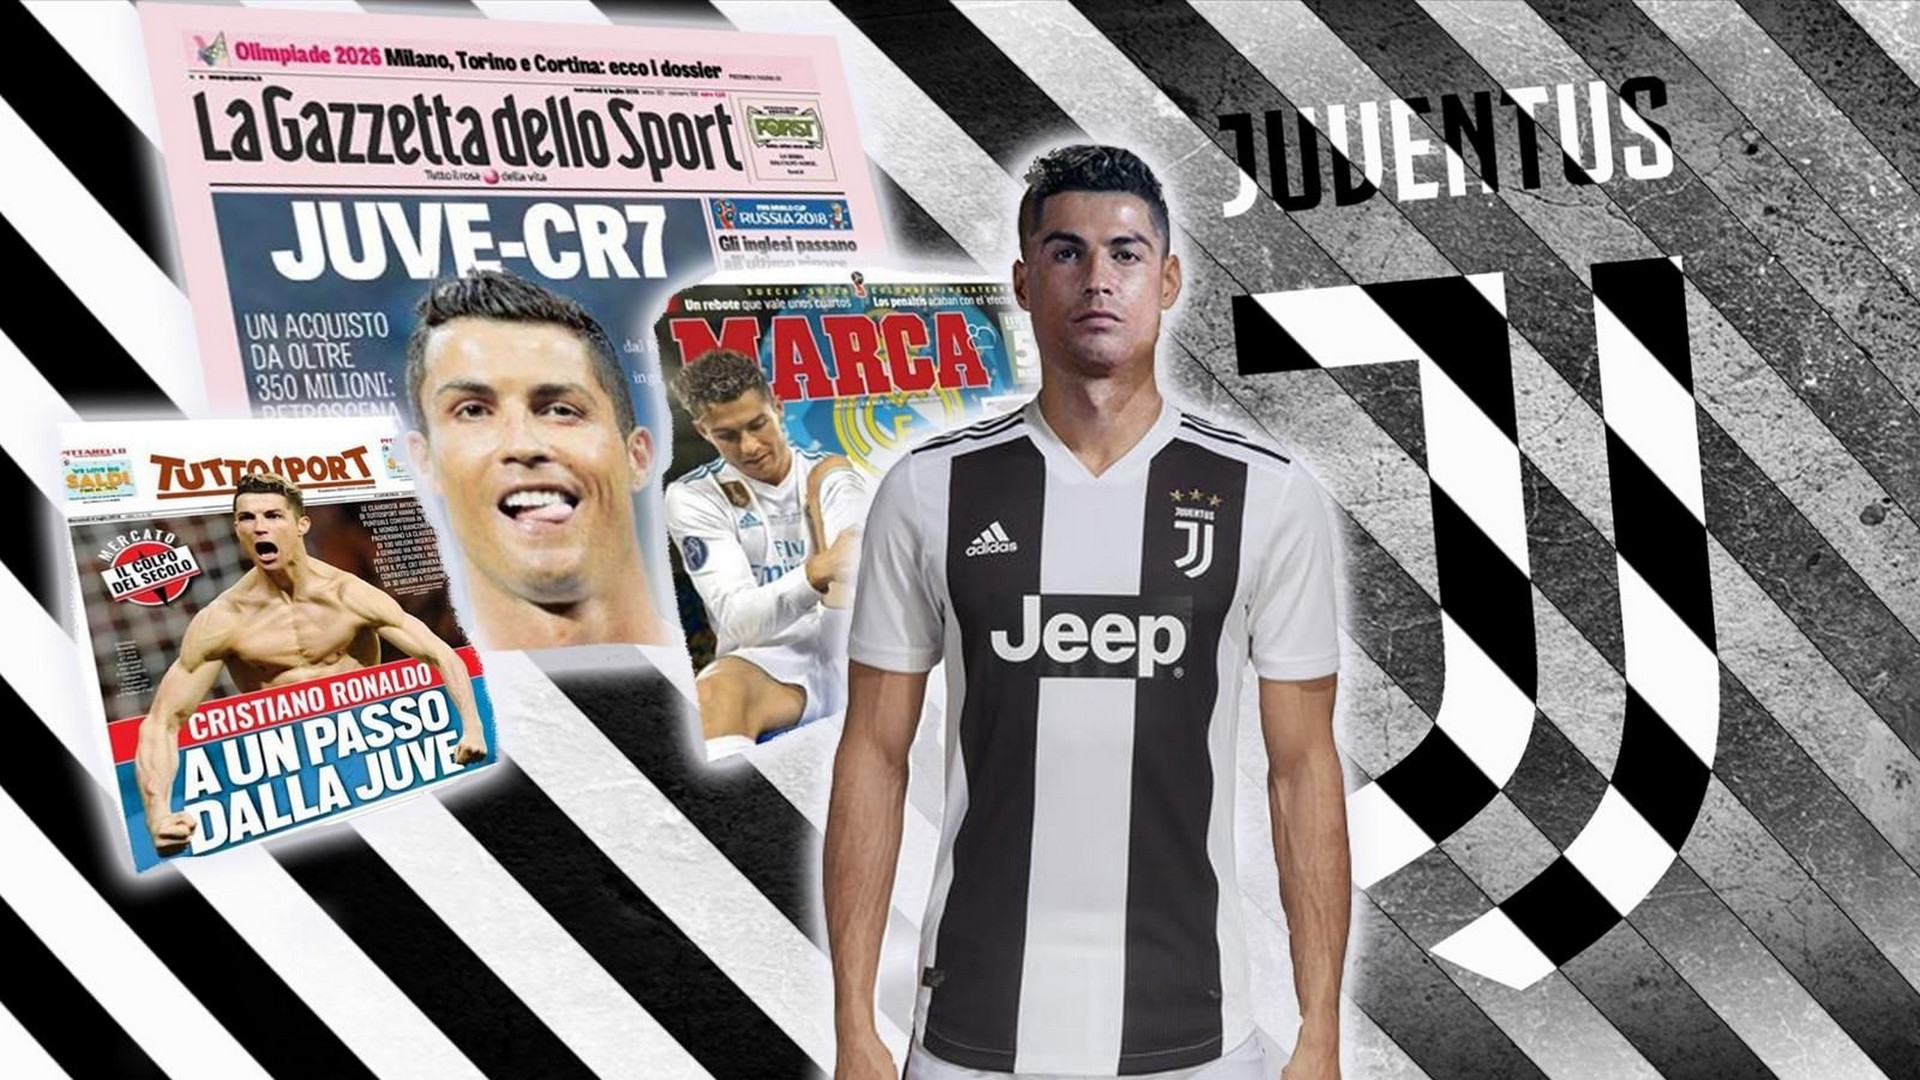 Wallpaper HD C Ronaldo Juventus With Resolution 1920X1080 pixel. You can make this wallpaper for your Desktop Computer Backgrounds, Mac Wallpapers, Android Lock screen or iPhone Screensavers